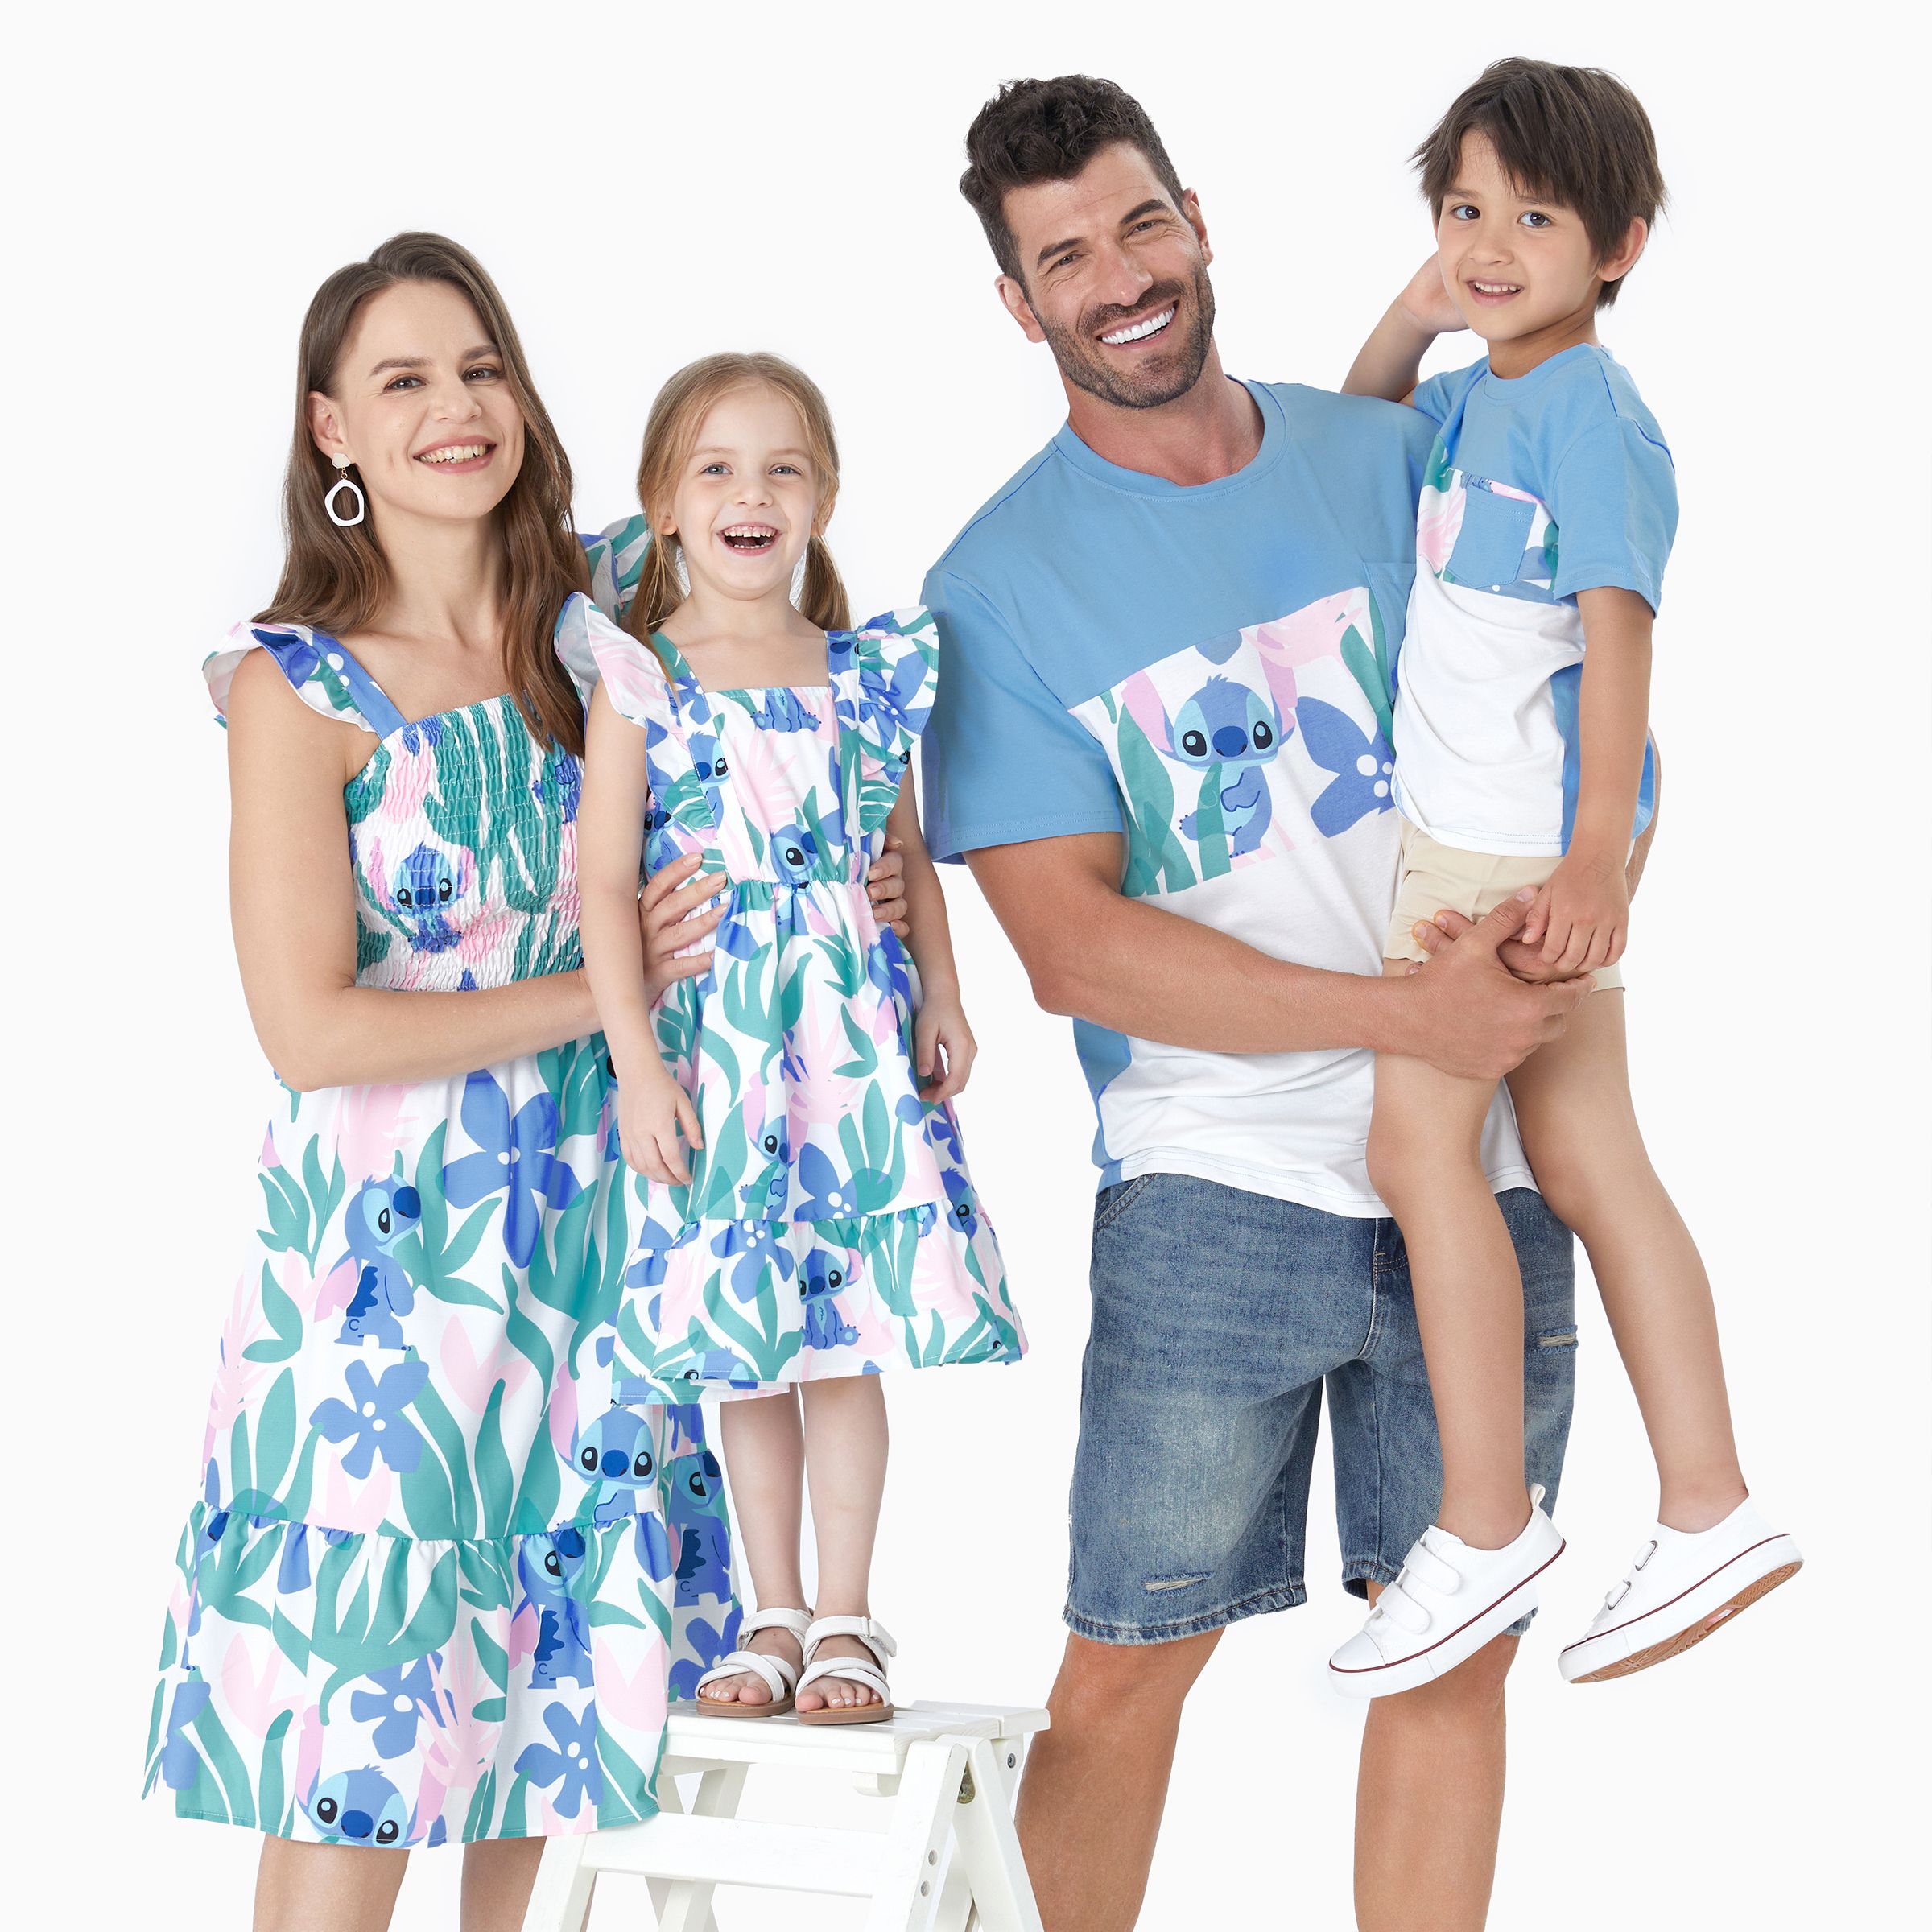 Floral Print Black Family Matching Sets(Ruffle Sleeve Dresses for Mom and Girl;Striped Short Sleeve T-shirts for Dad and Boy)